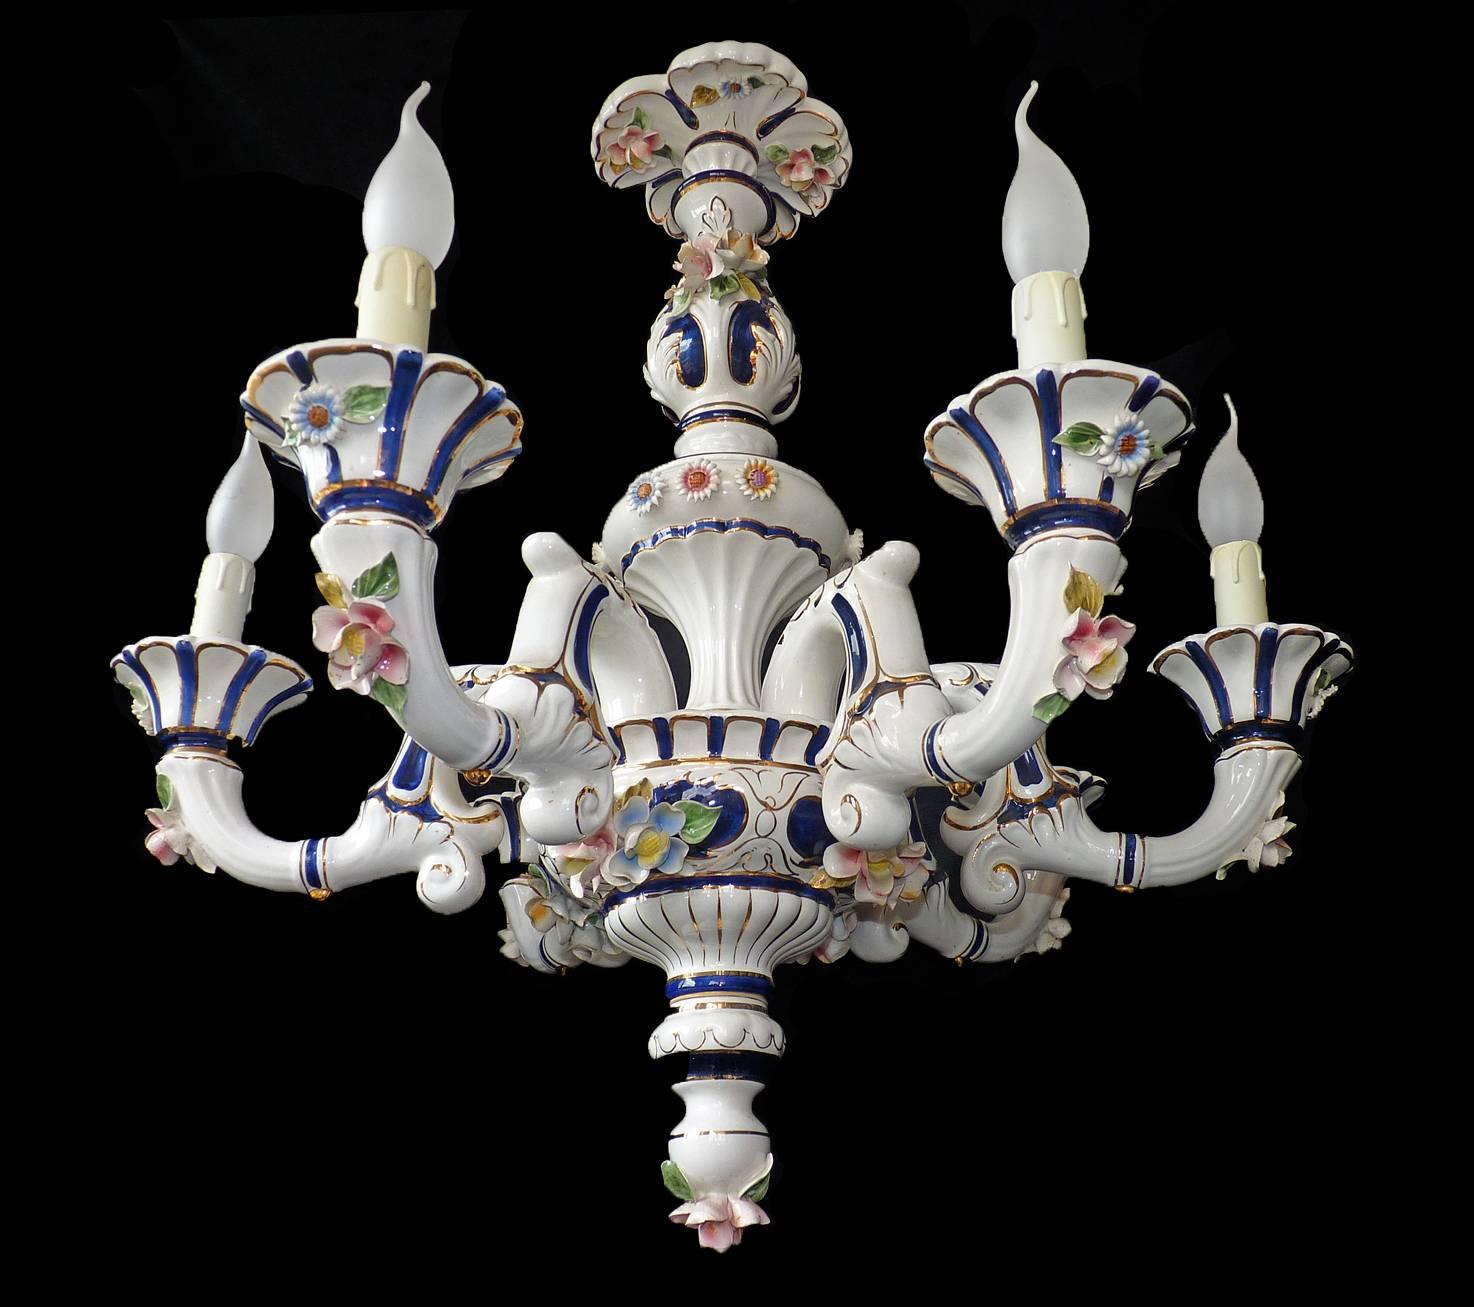 Exceptional quality Italian Capo Di Monte handmade porcelain chandelier. Charming and very rare Italian work of art in white with blue and gold accents, fully decorated with hand painted flowers.
Measures:
Diameter 26 in / 66 cm
Height 45 in (30 in